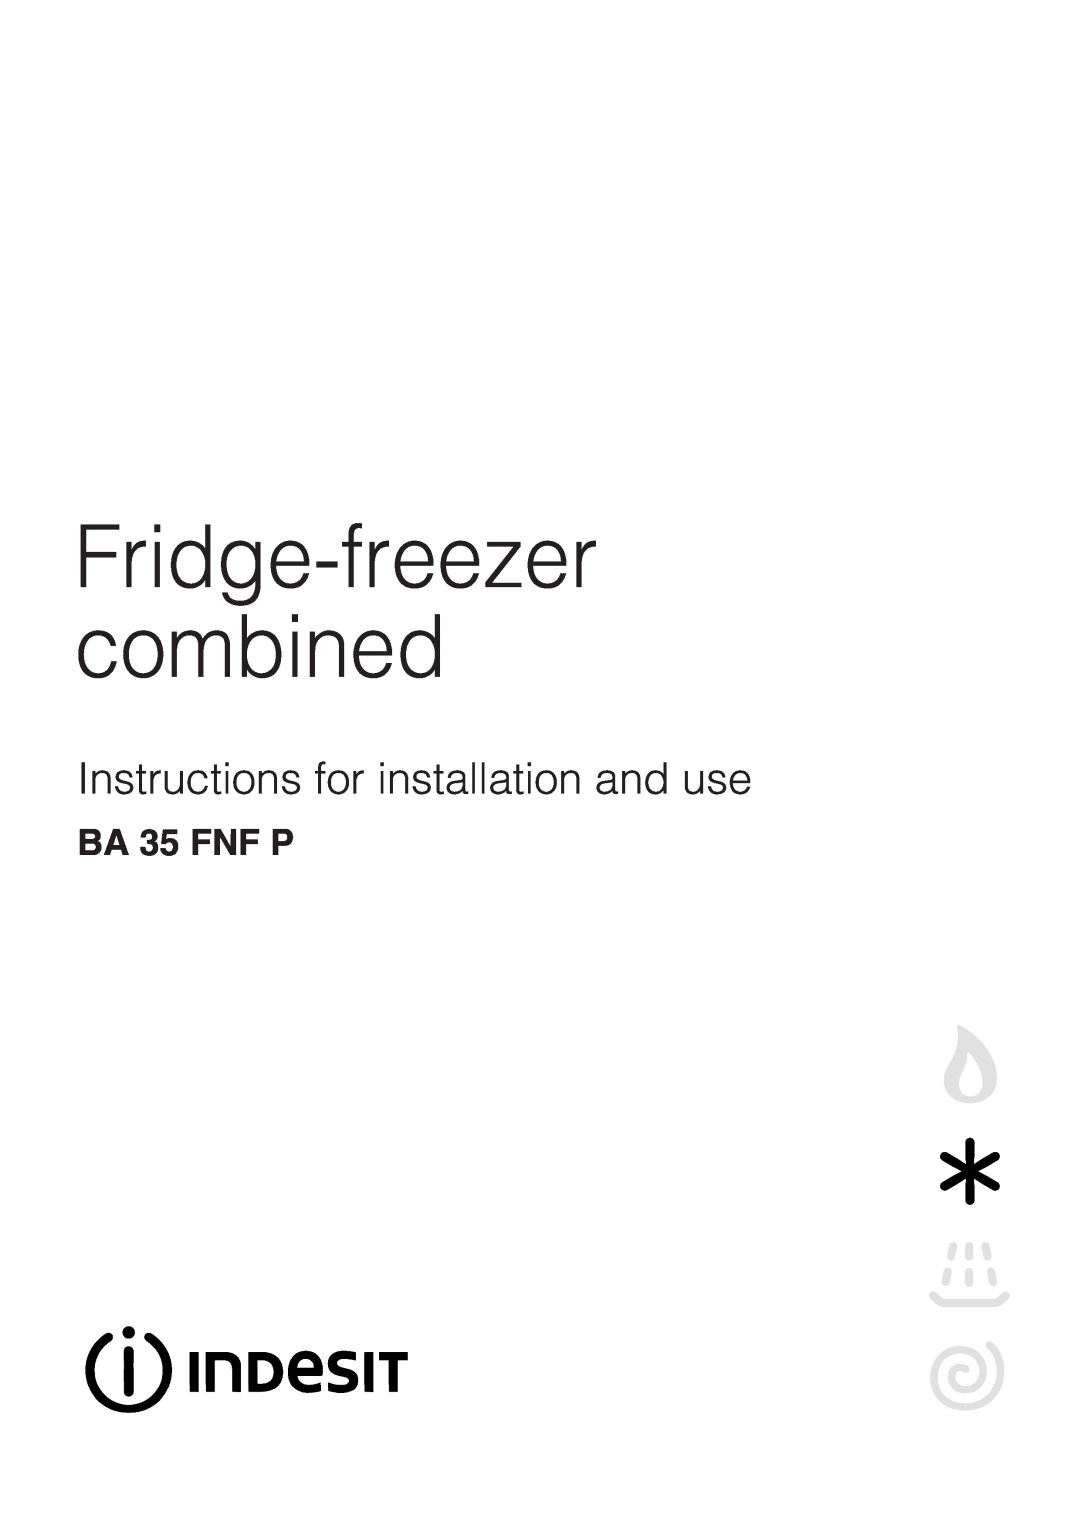 Indesit BA35FNF P manual BA 35 FNF P, Fridge-freezer combined, Instructions for installation and use 